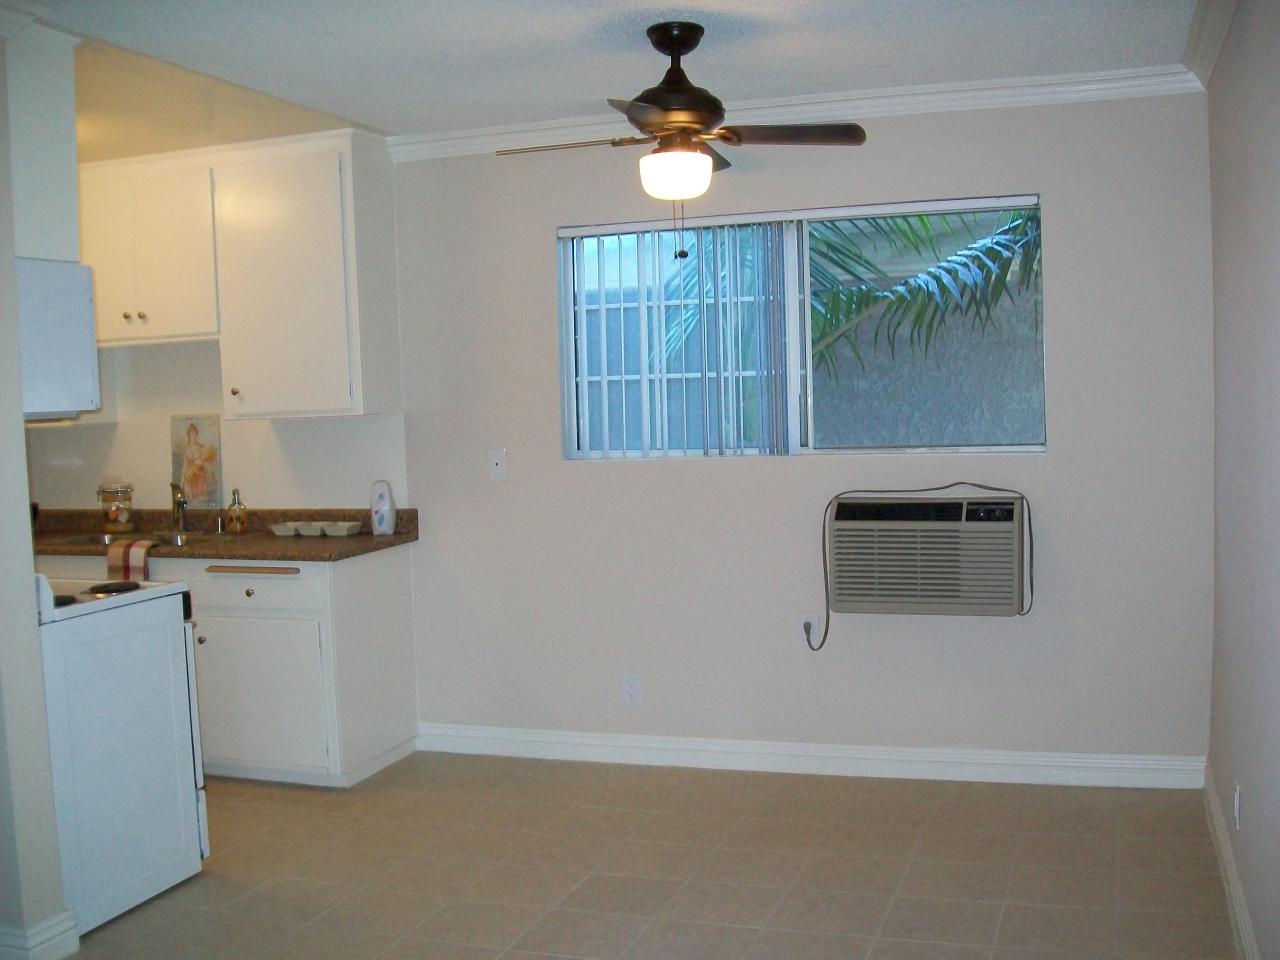 Photo of Kingsbury Villas Apartments - a view of an apartment interior - dining area